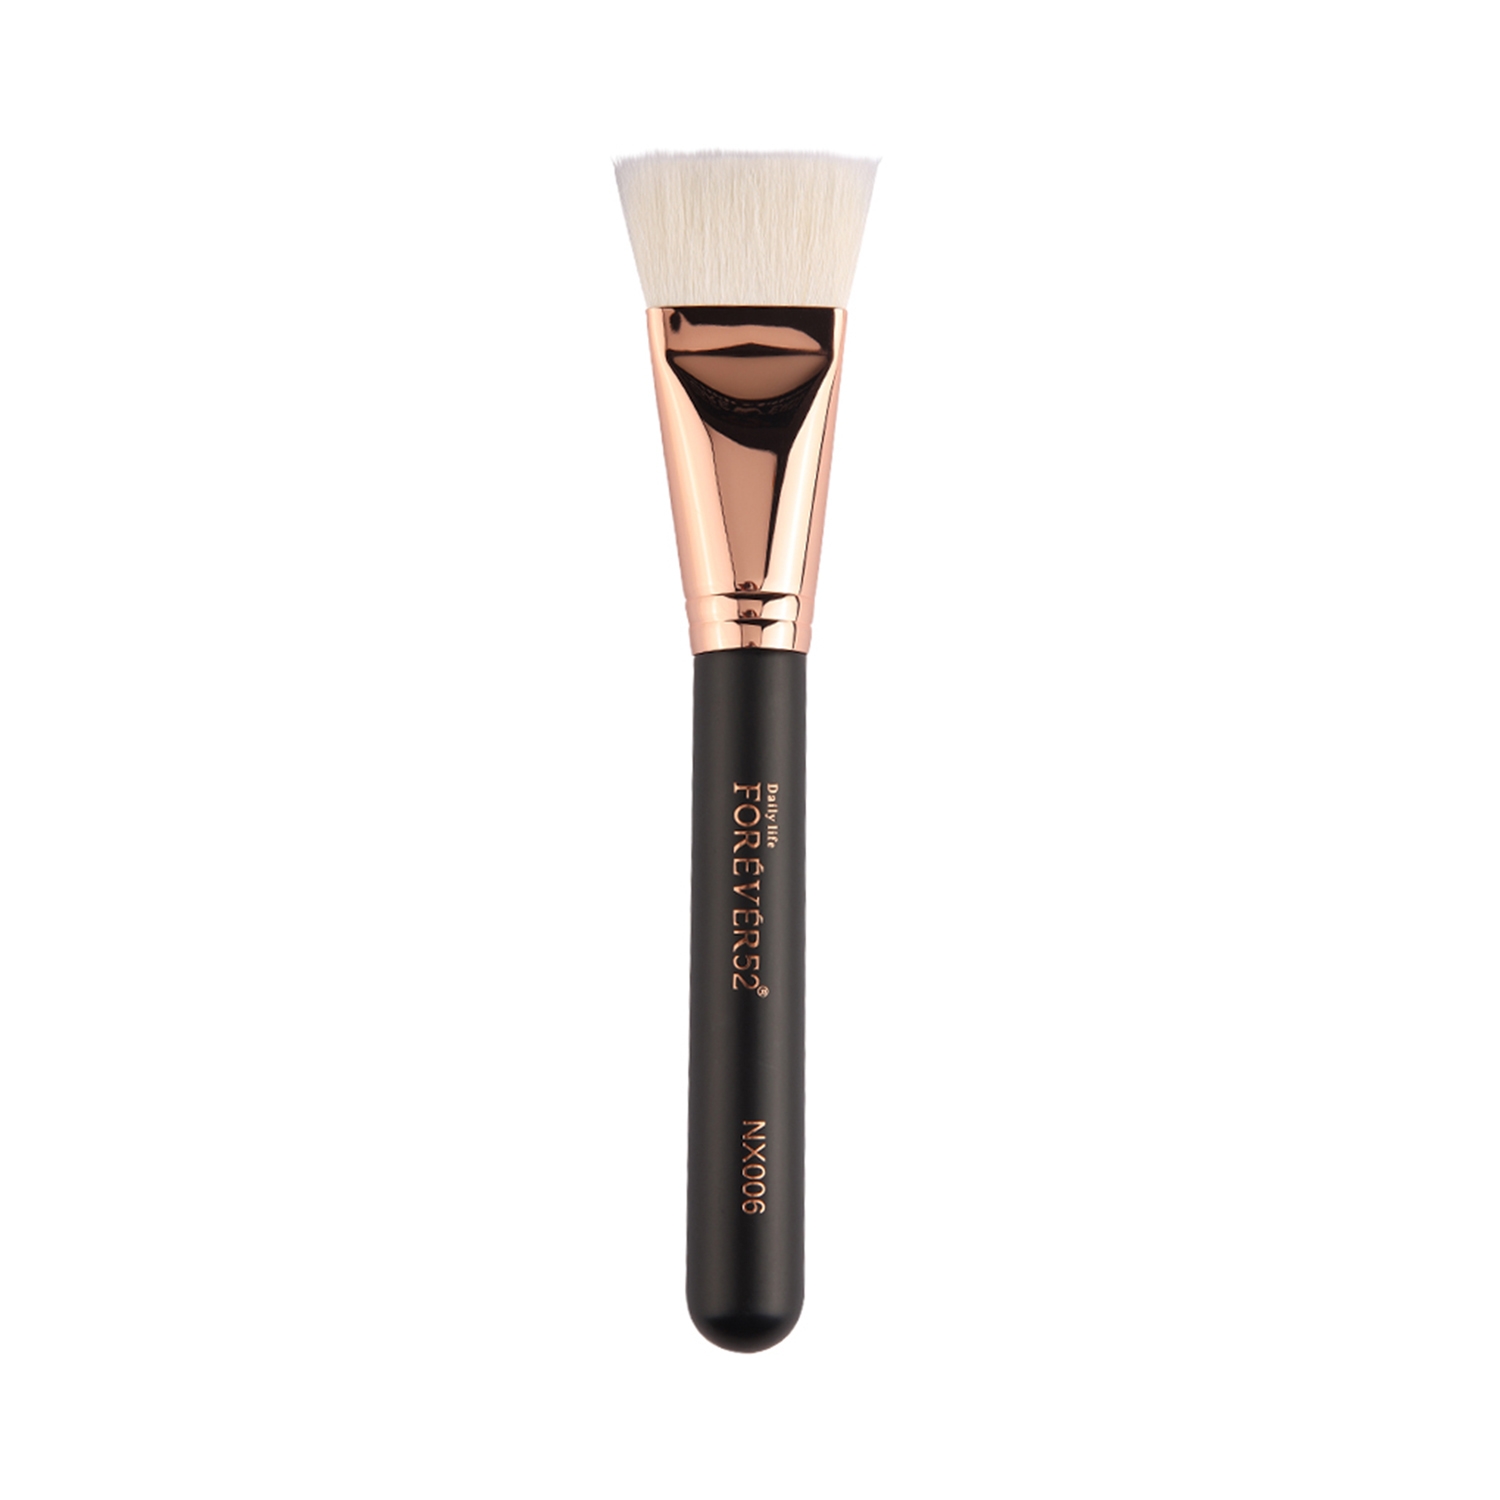 Daily Life Forever52 Contour Brush - NX006 (1Pc)